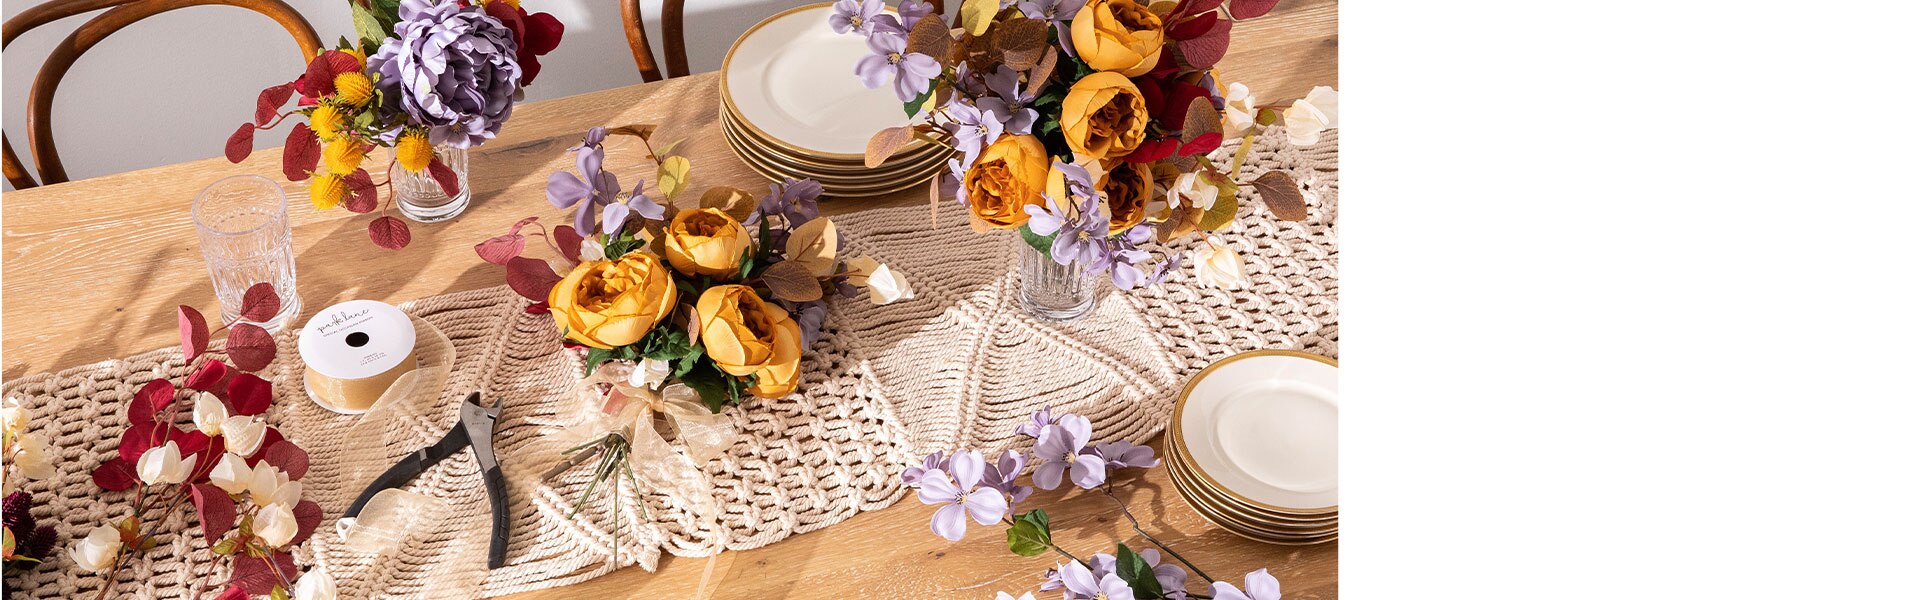 We have all the wedding essentials you need to decorate your wedding table or create a center piece.